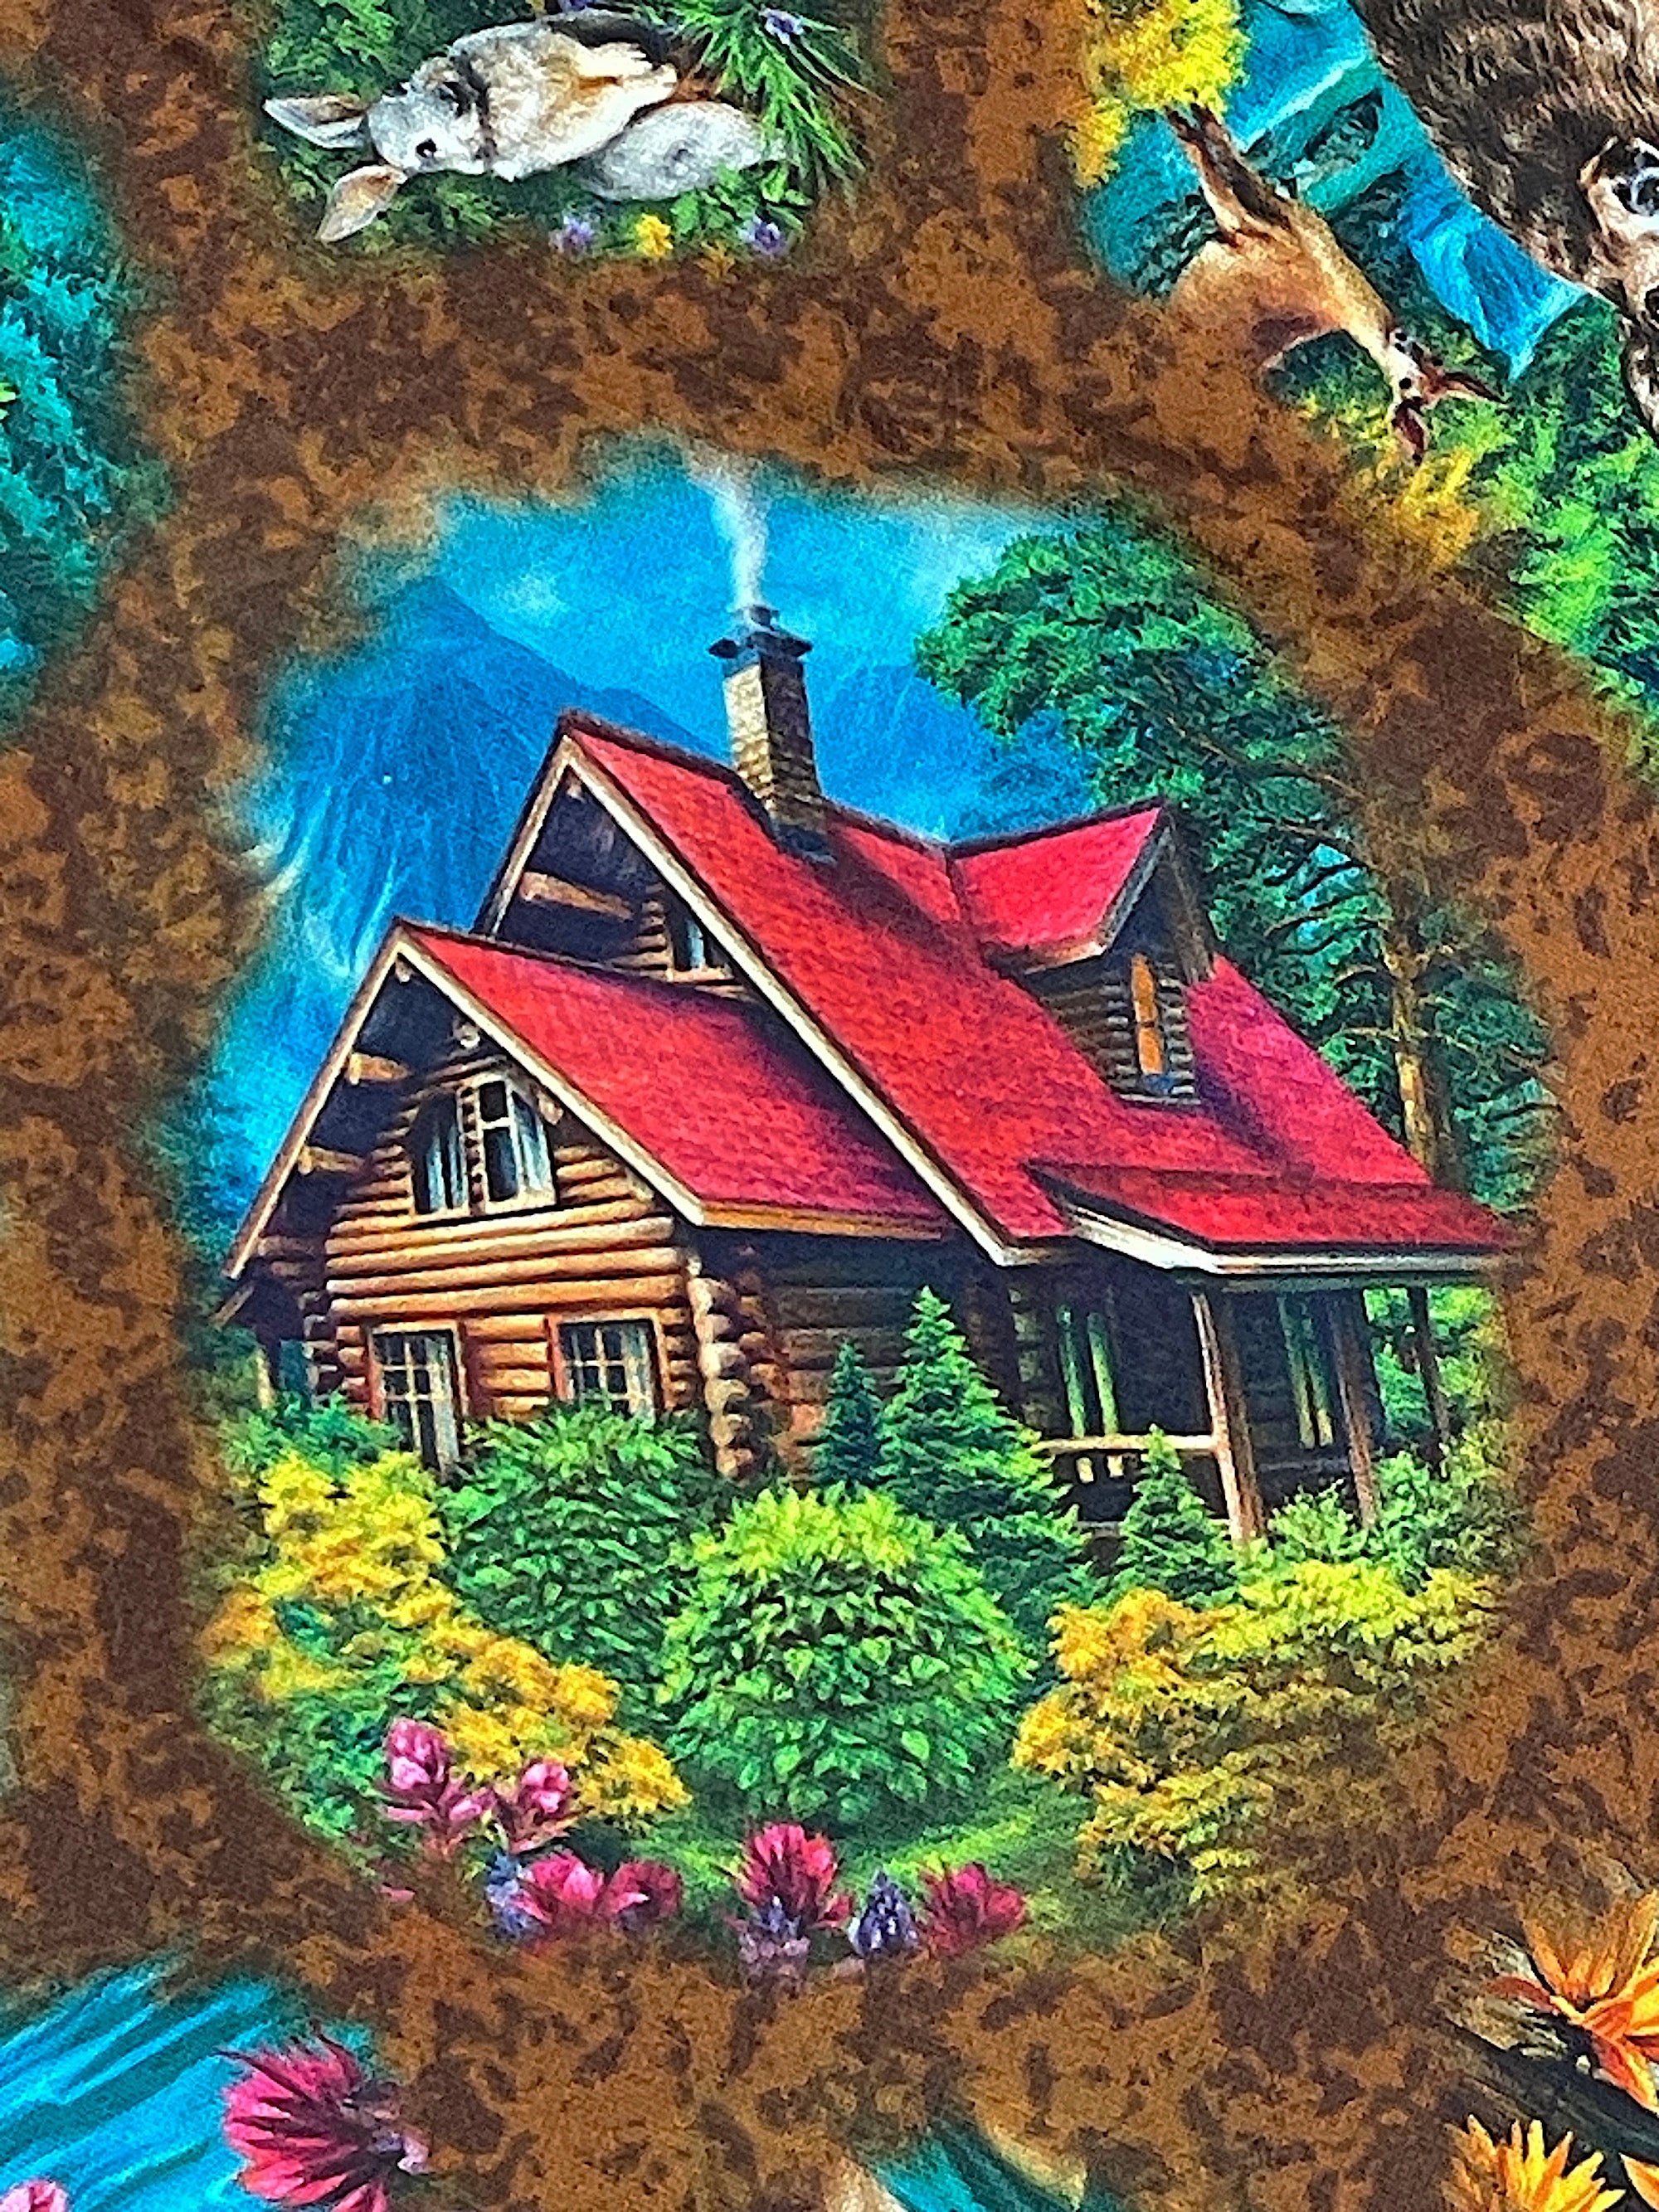 Close up of a cabin with a red roof.